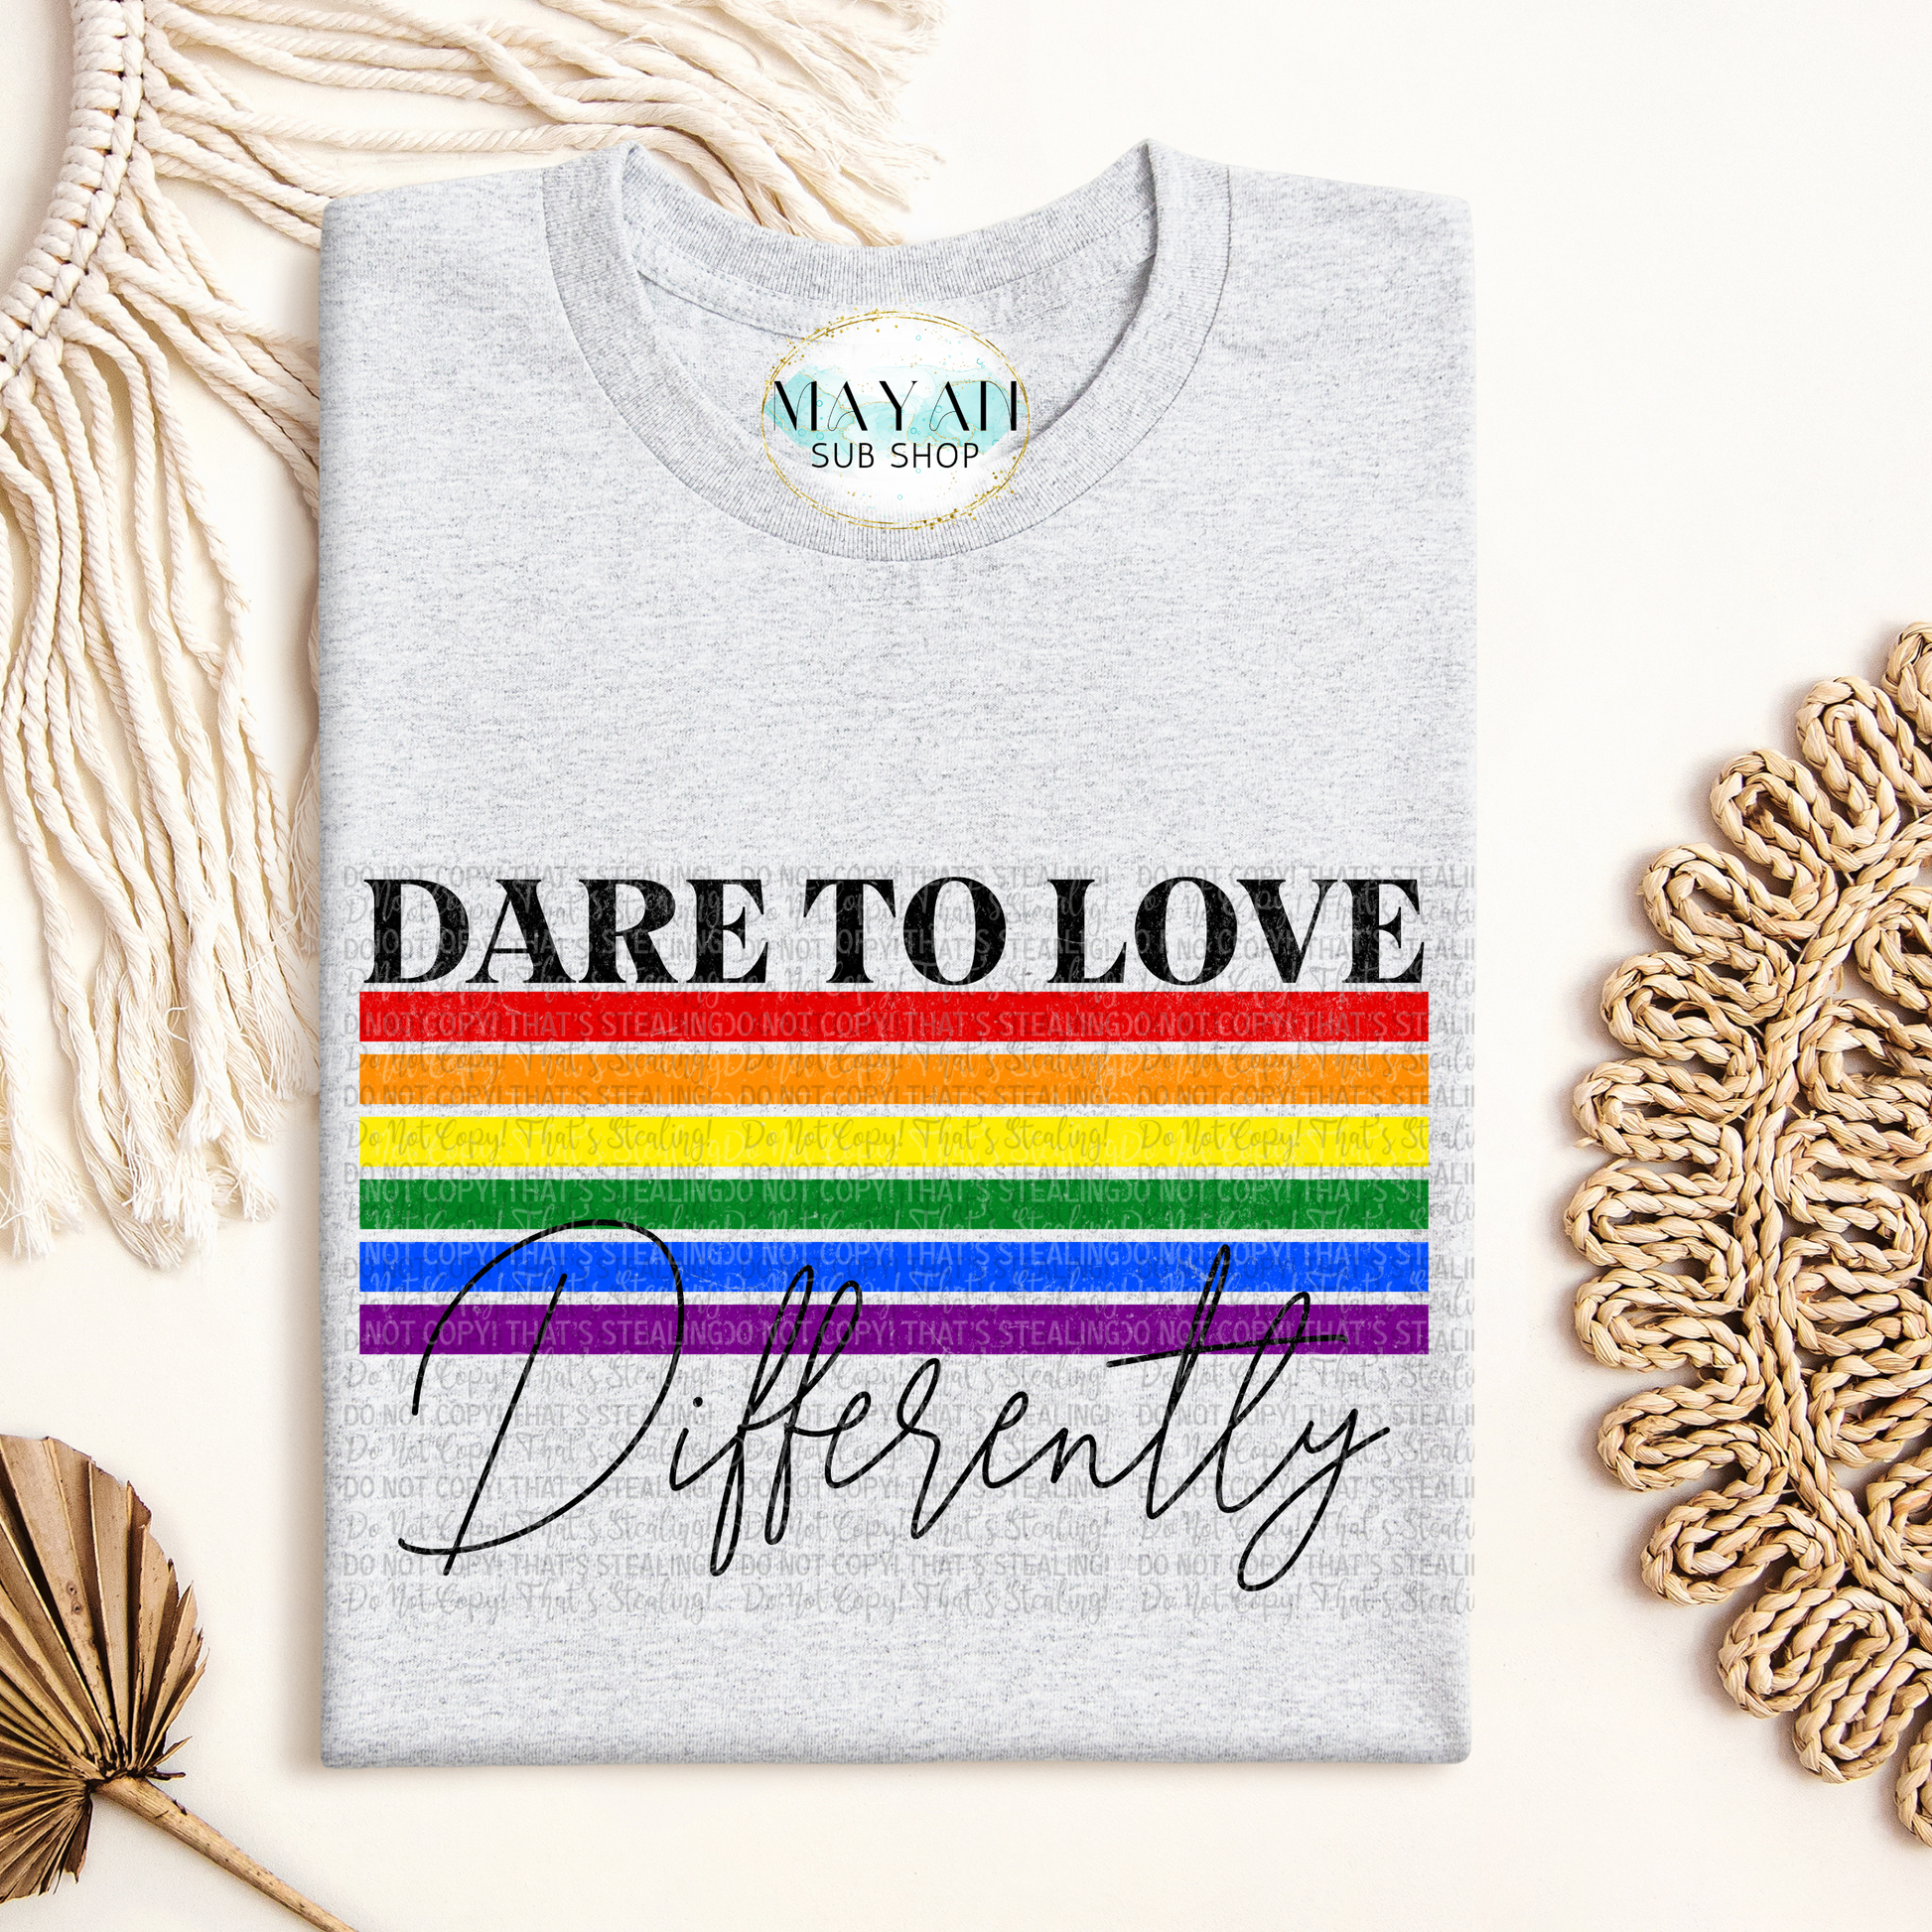 Dare to love differently shirt. -Mayan Sub Shop